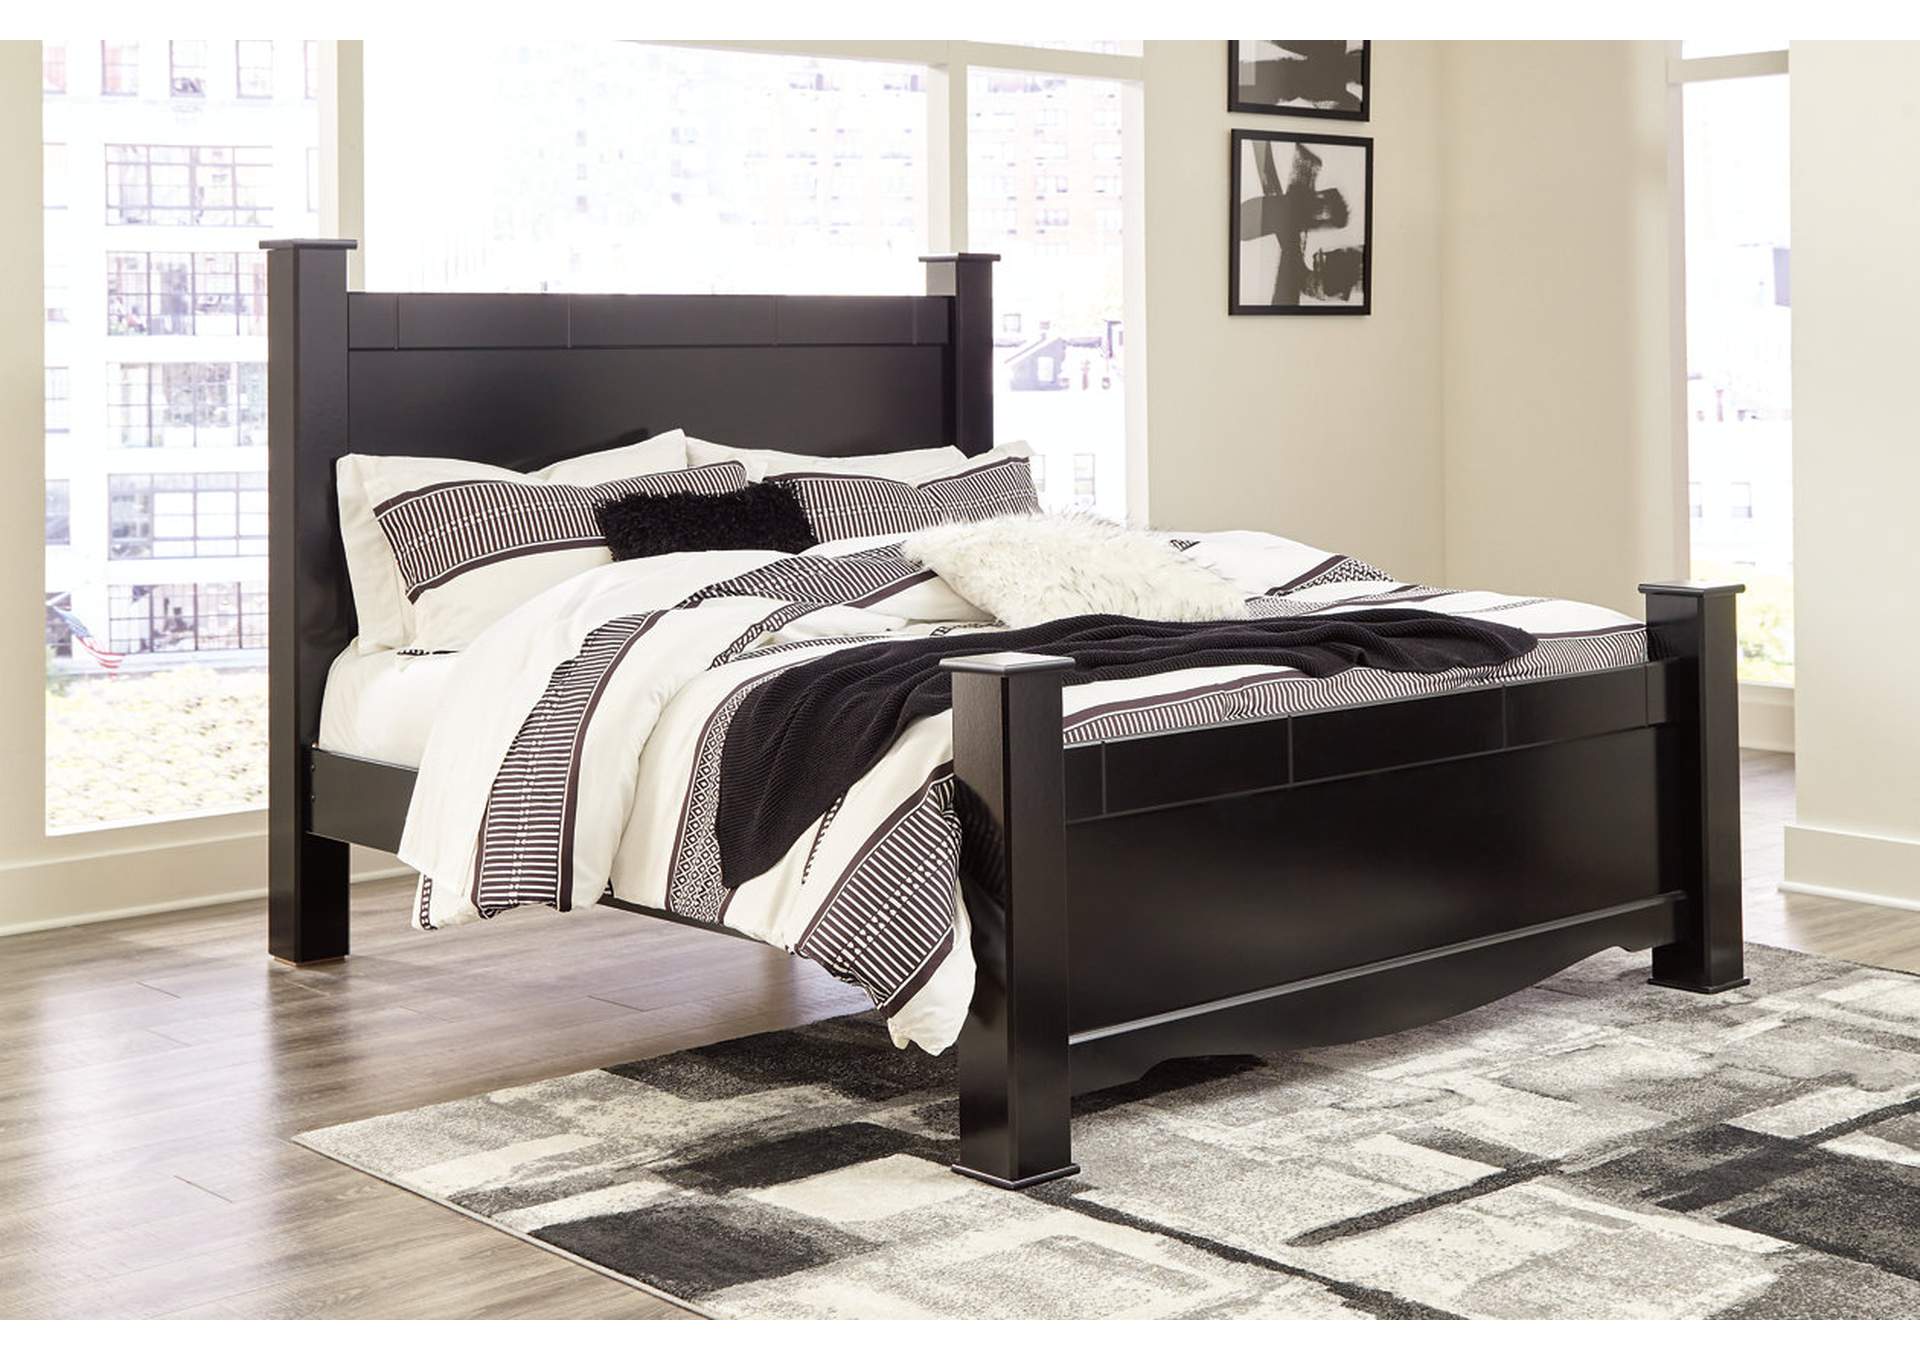 Mirlotown King Poster Bed,Signature Design By Ashley